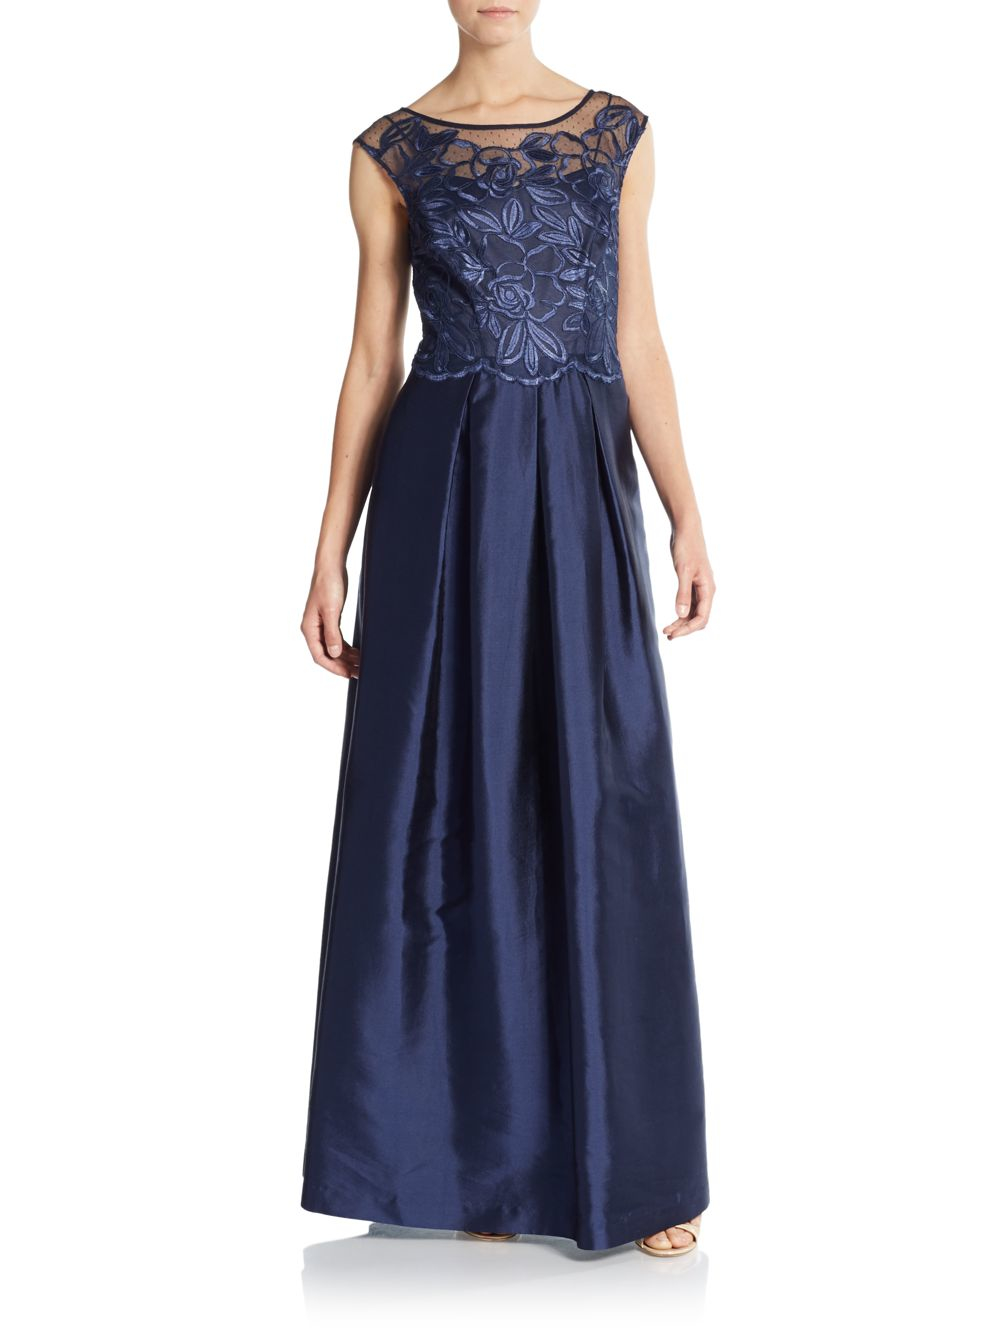 Kay unger Floral Lace Ball Gown in Blue | Lyst